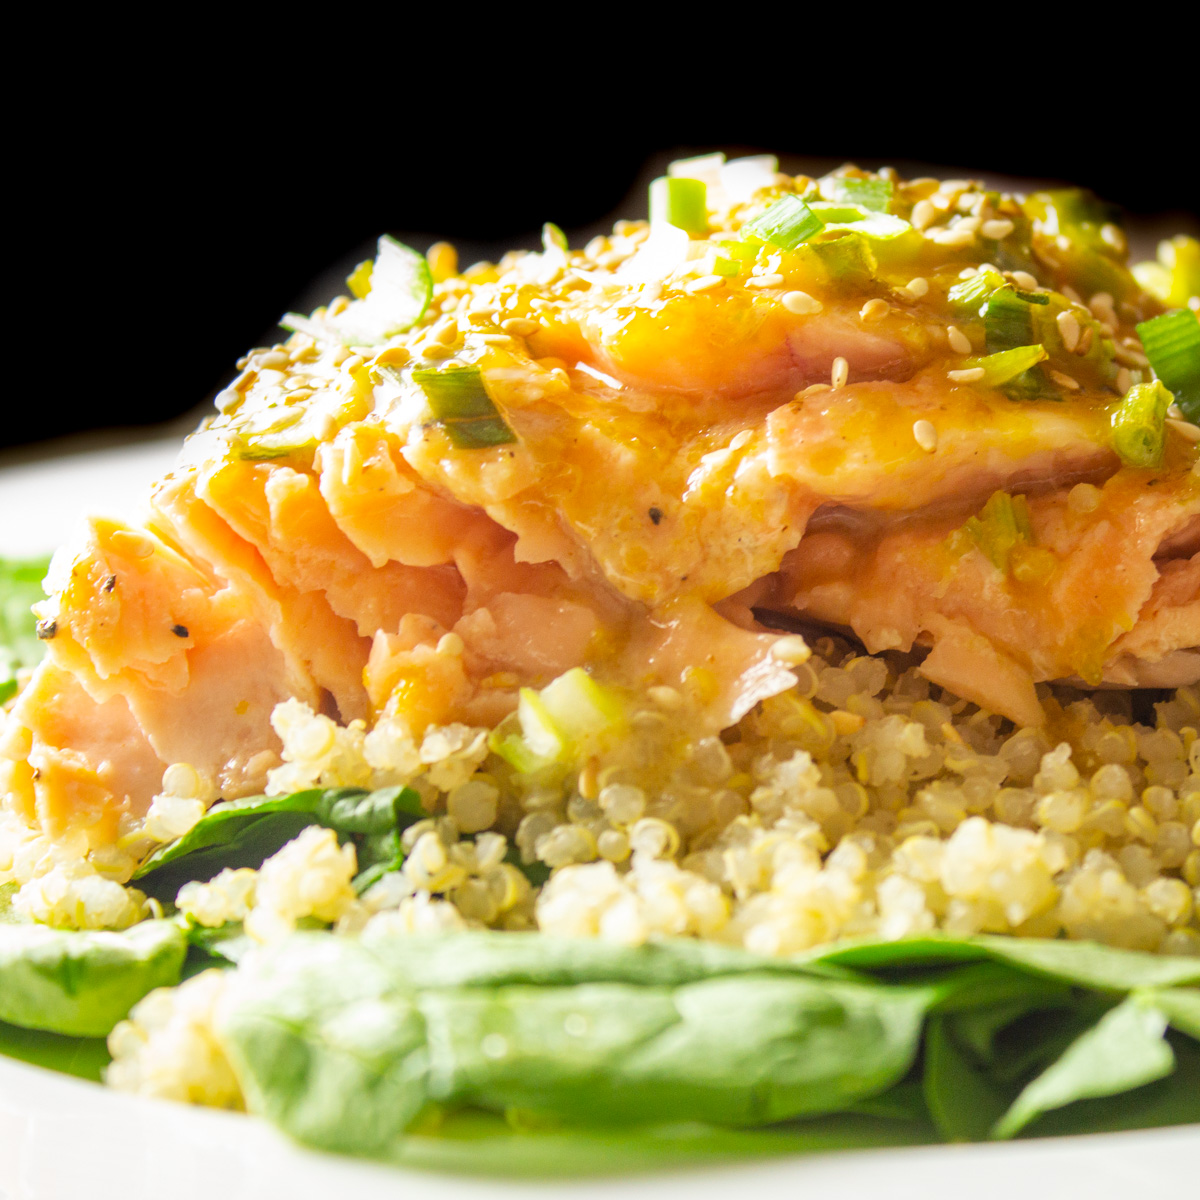 salmon with citrus glaze on top of quinoa and spinach on plate.